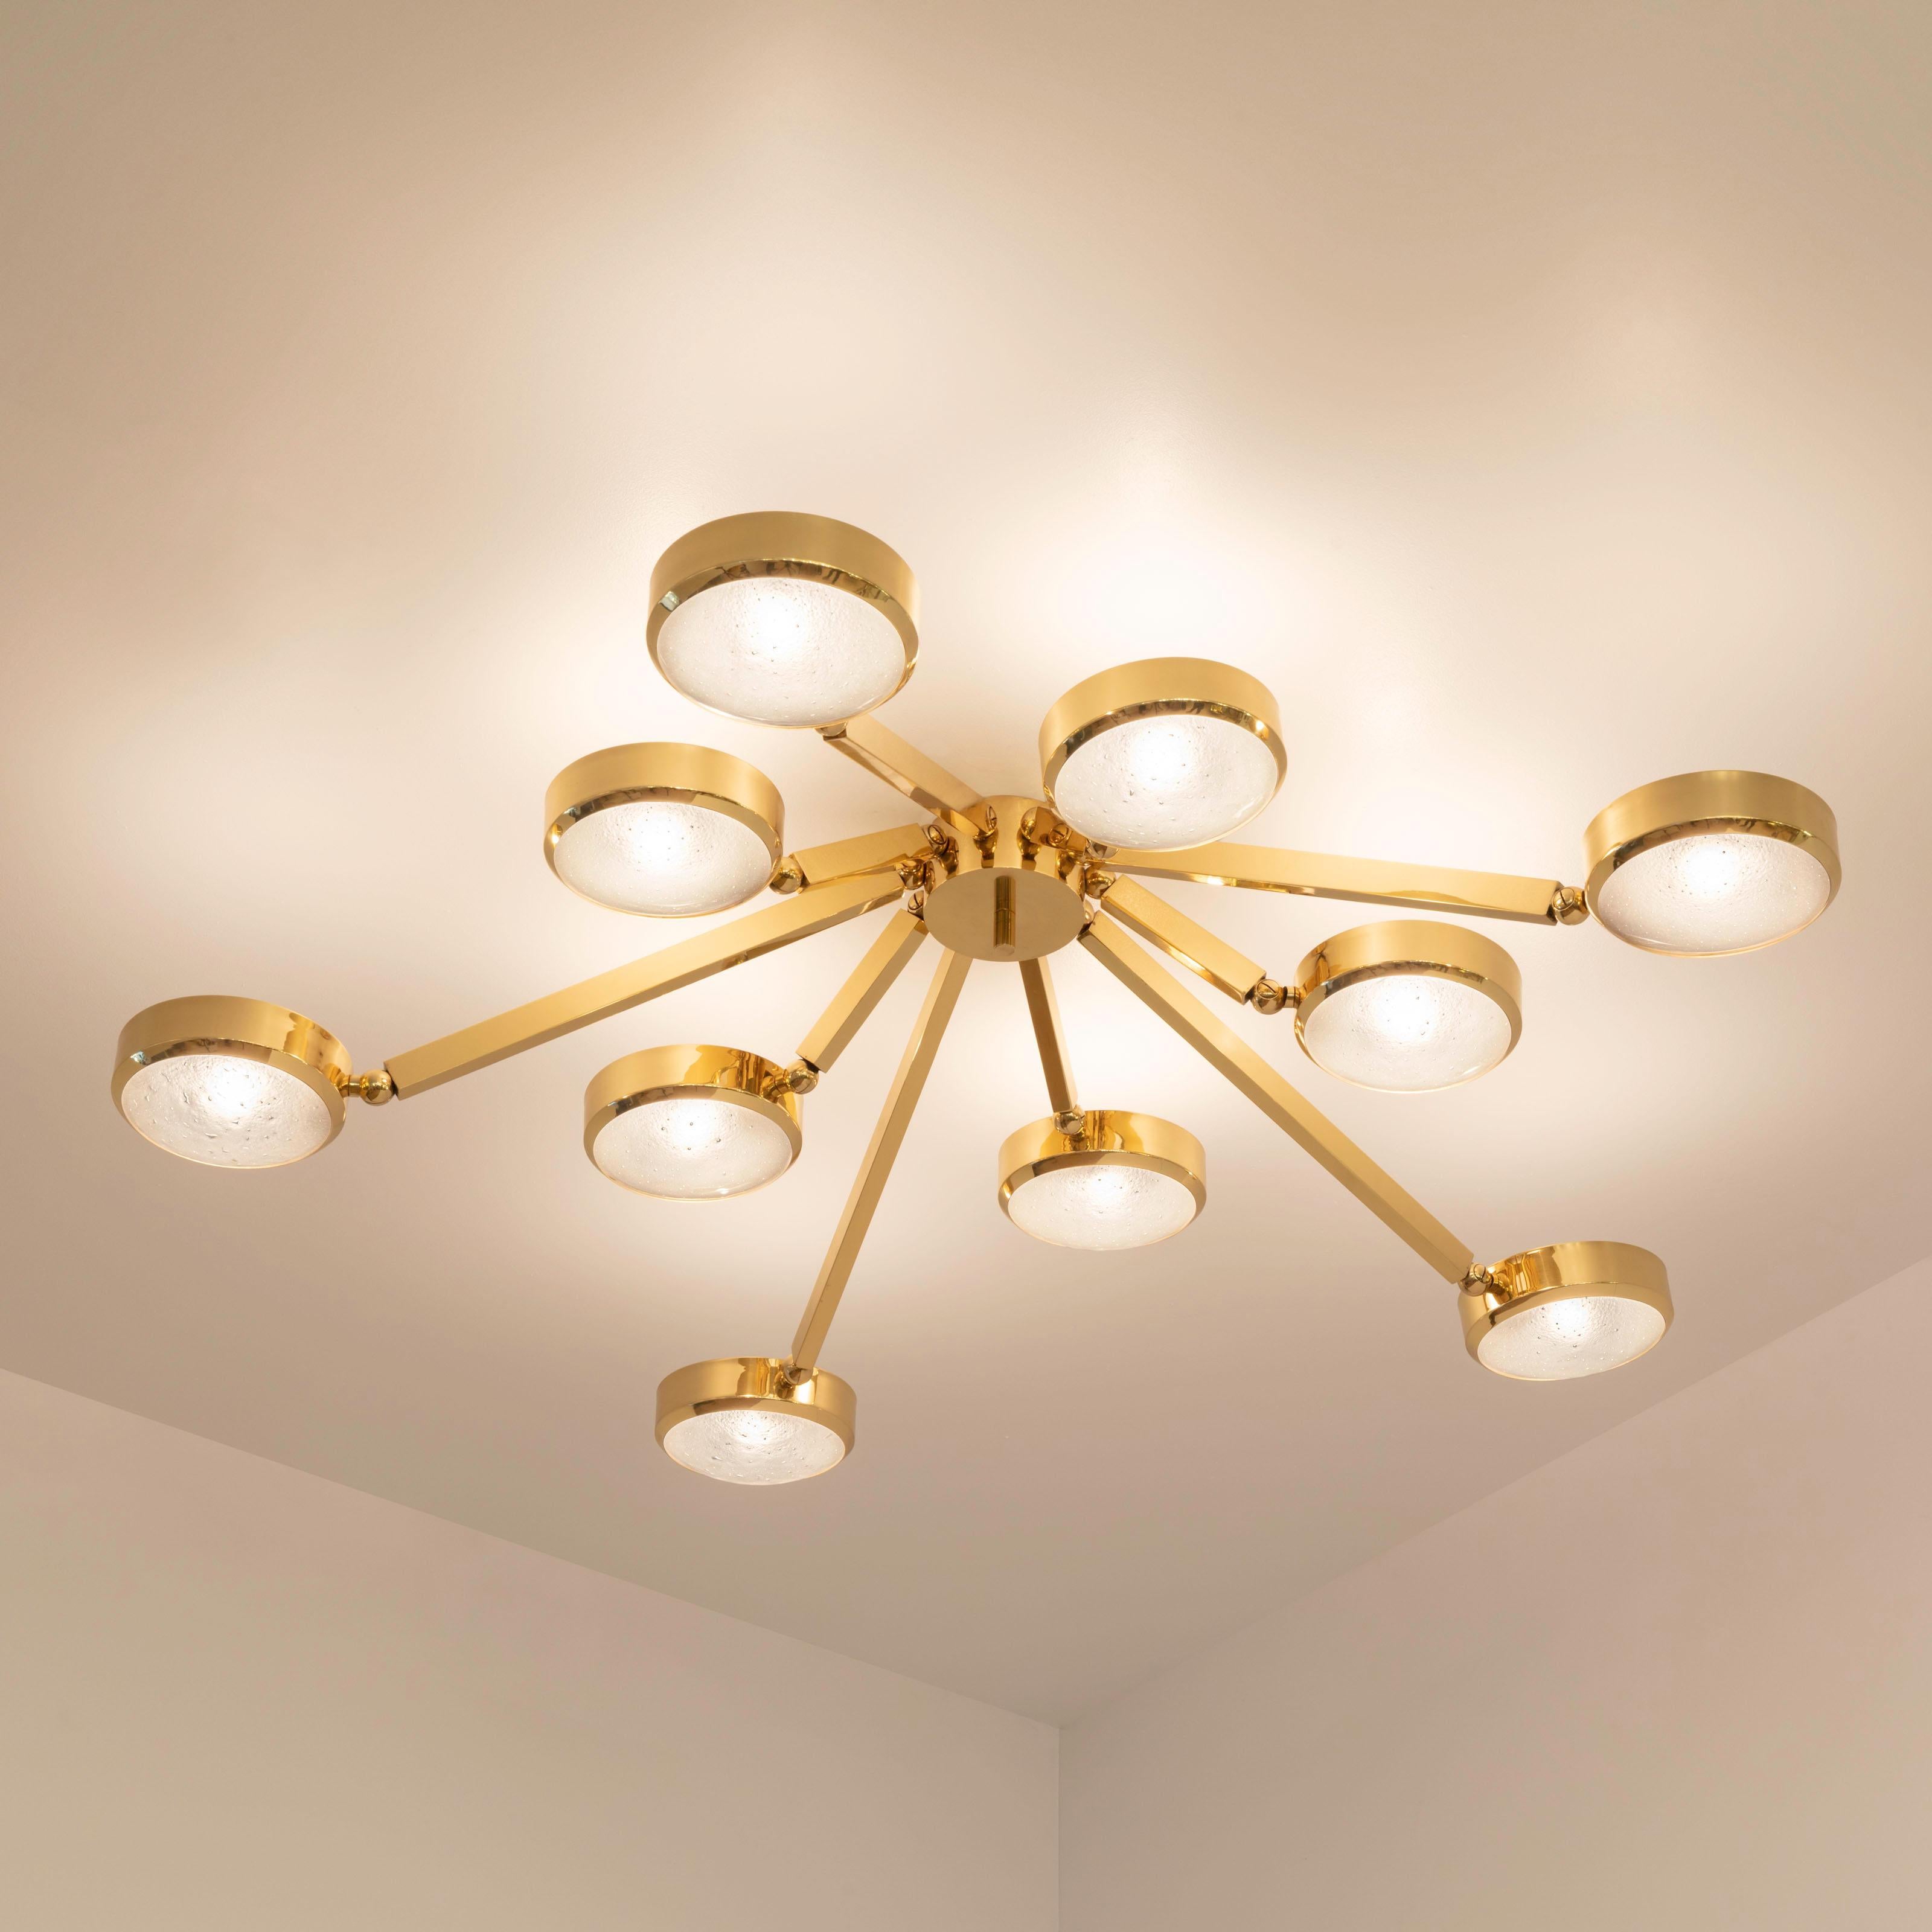 Contemporary Oculus Ceiling Light by Gaspare Asaro-Murano Glass and Polished Nickel Finish For Sale